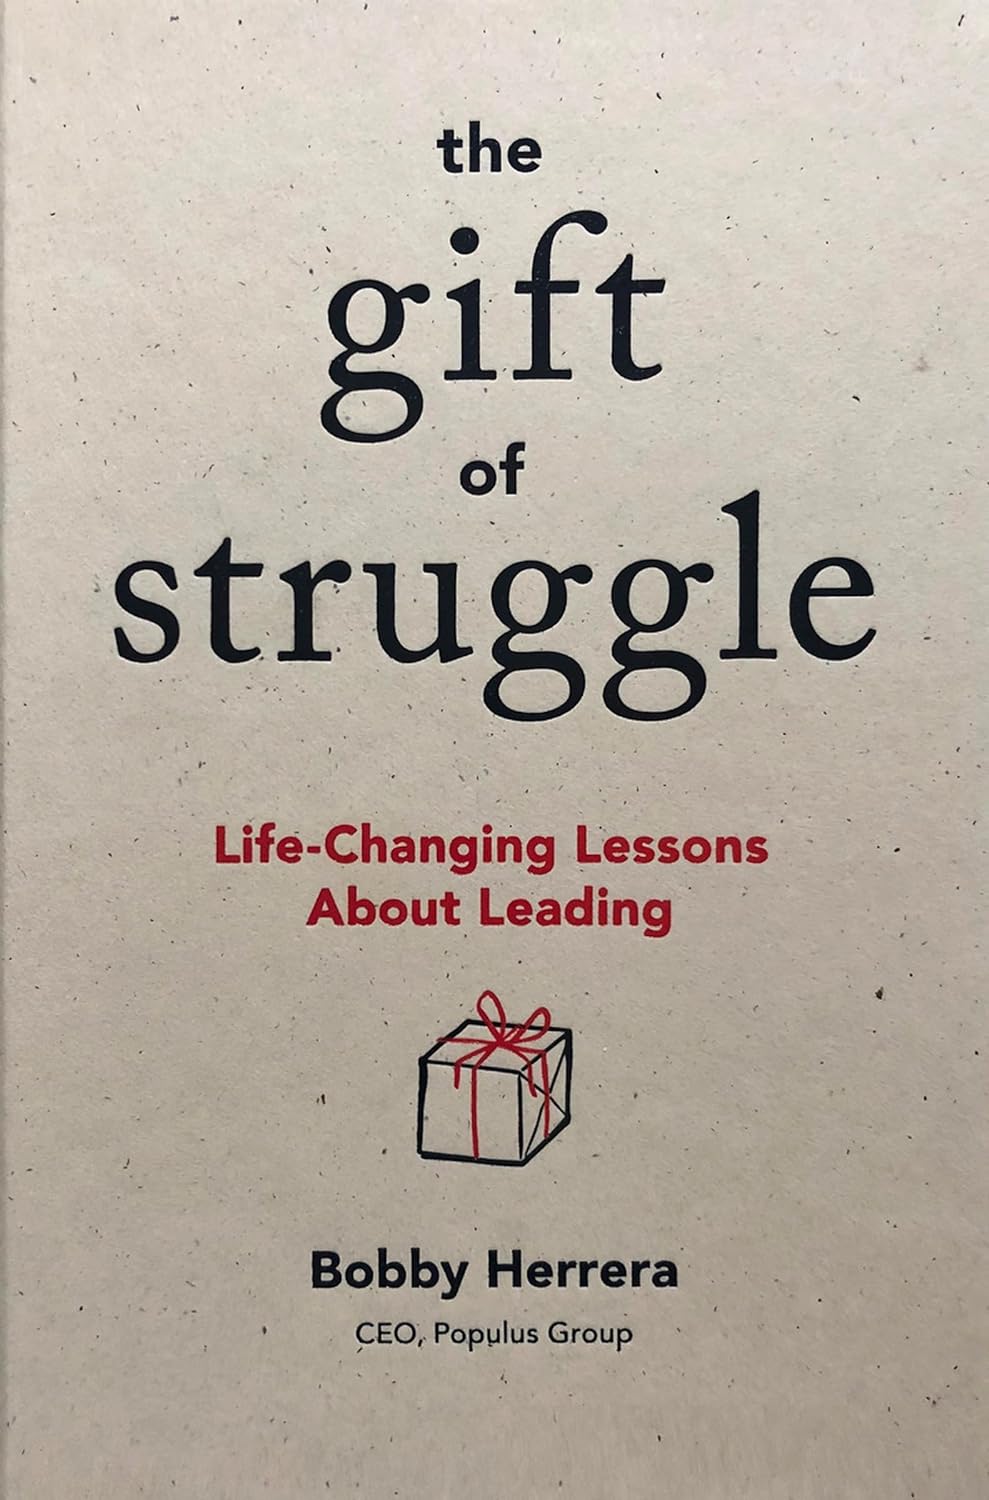 Bobby Herrera - The Gift of Struggle. Life-Changing Lessons About Leading